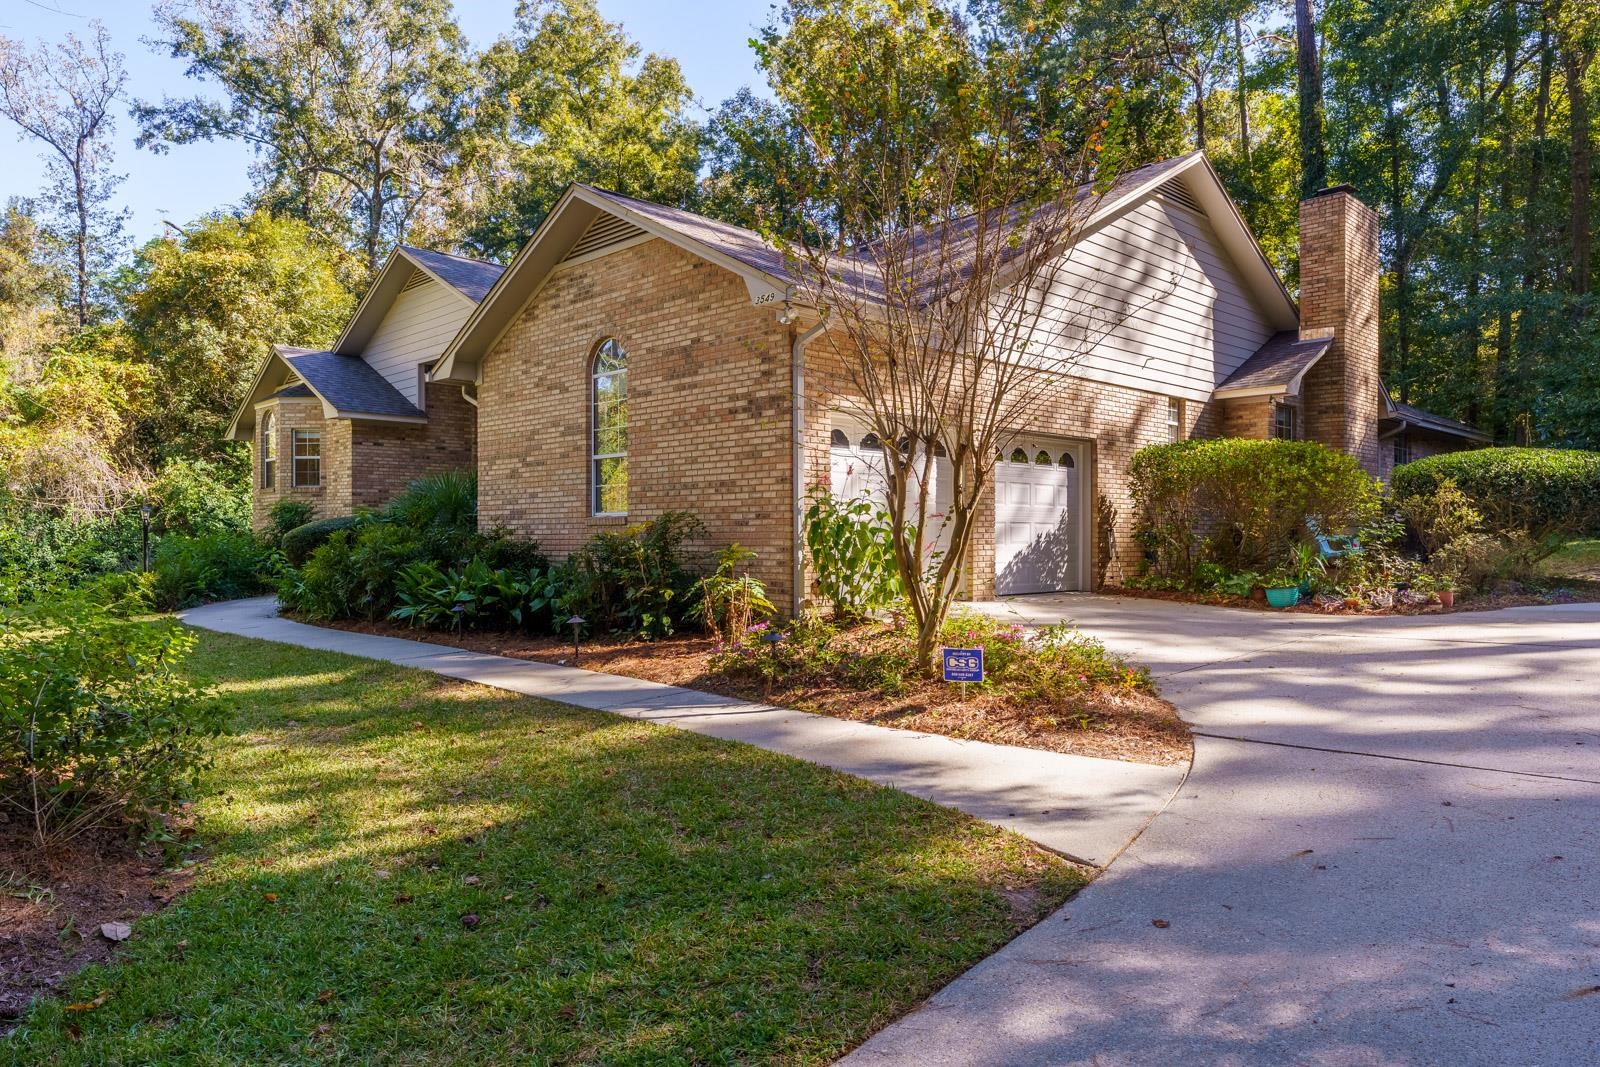 3549 Lakeshore Drive,TALLAHASSEE,Florida 32312,3 Bedrooms Bedrooms,2 BathroomsBathrooms,Detached single family,3549 Lakeshore Drive,365688